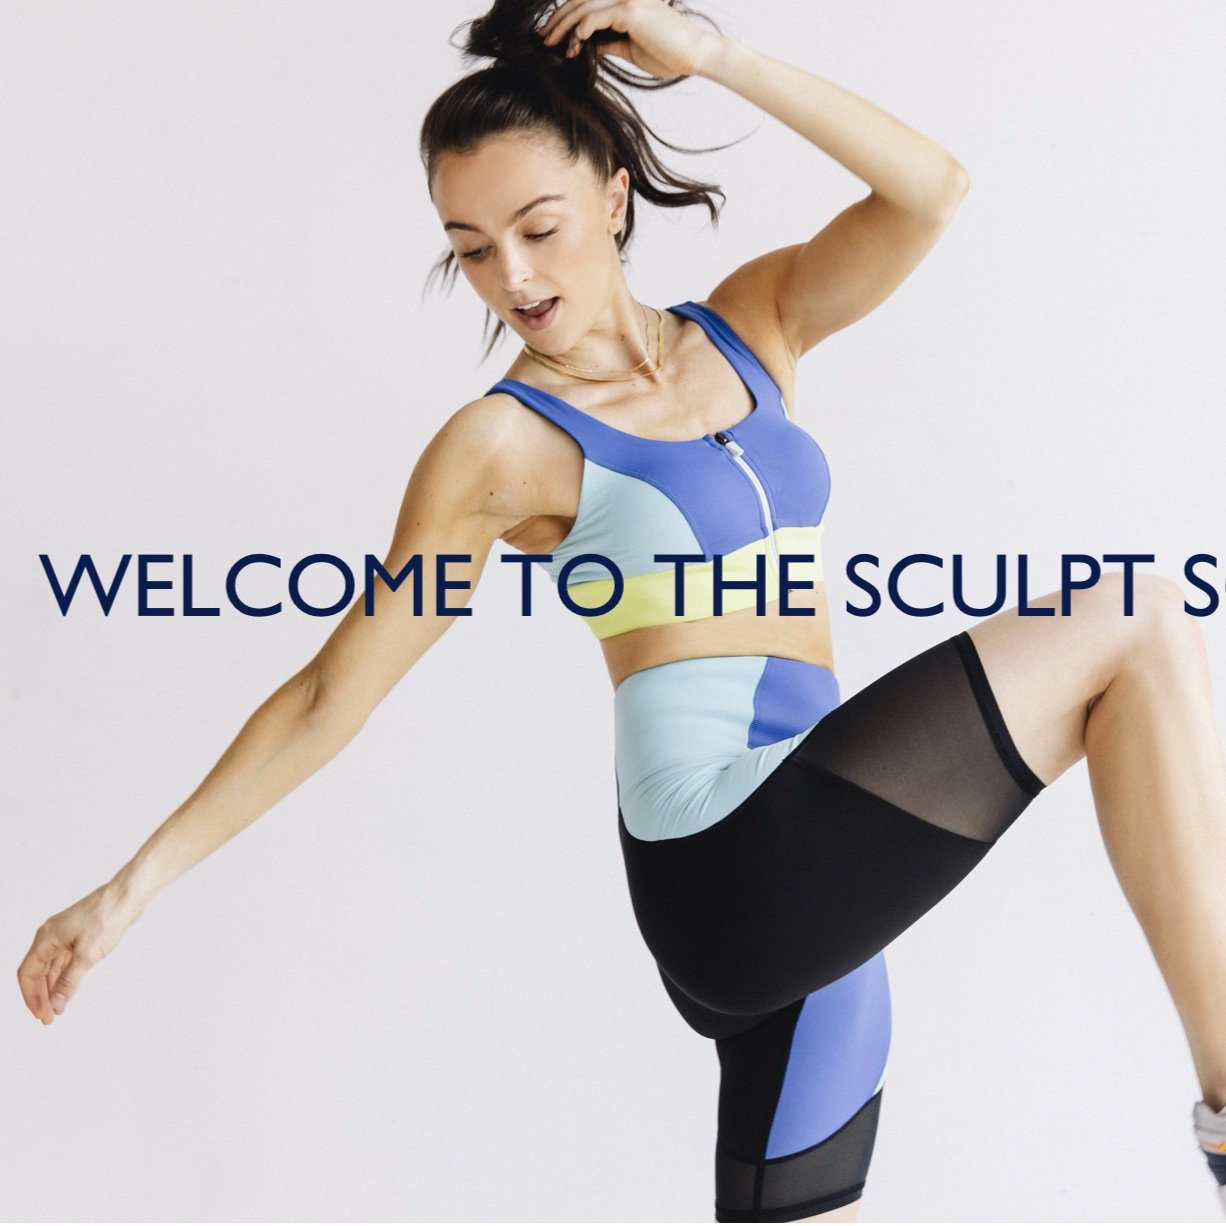 The Scultp Society #1 at home fitness app move to reduce anxiety